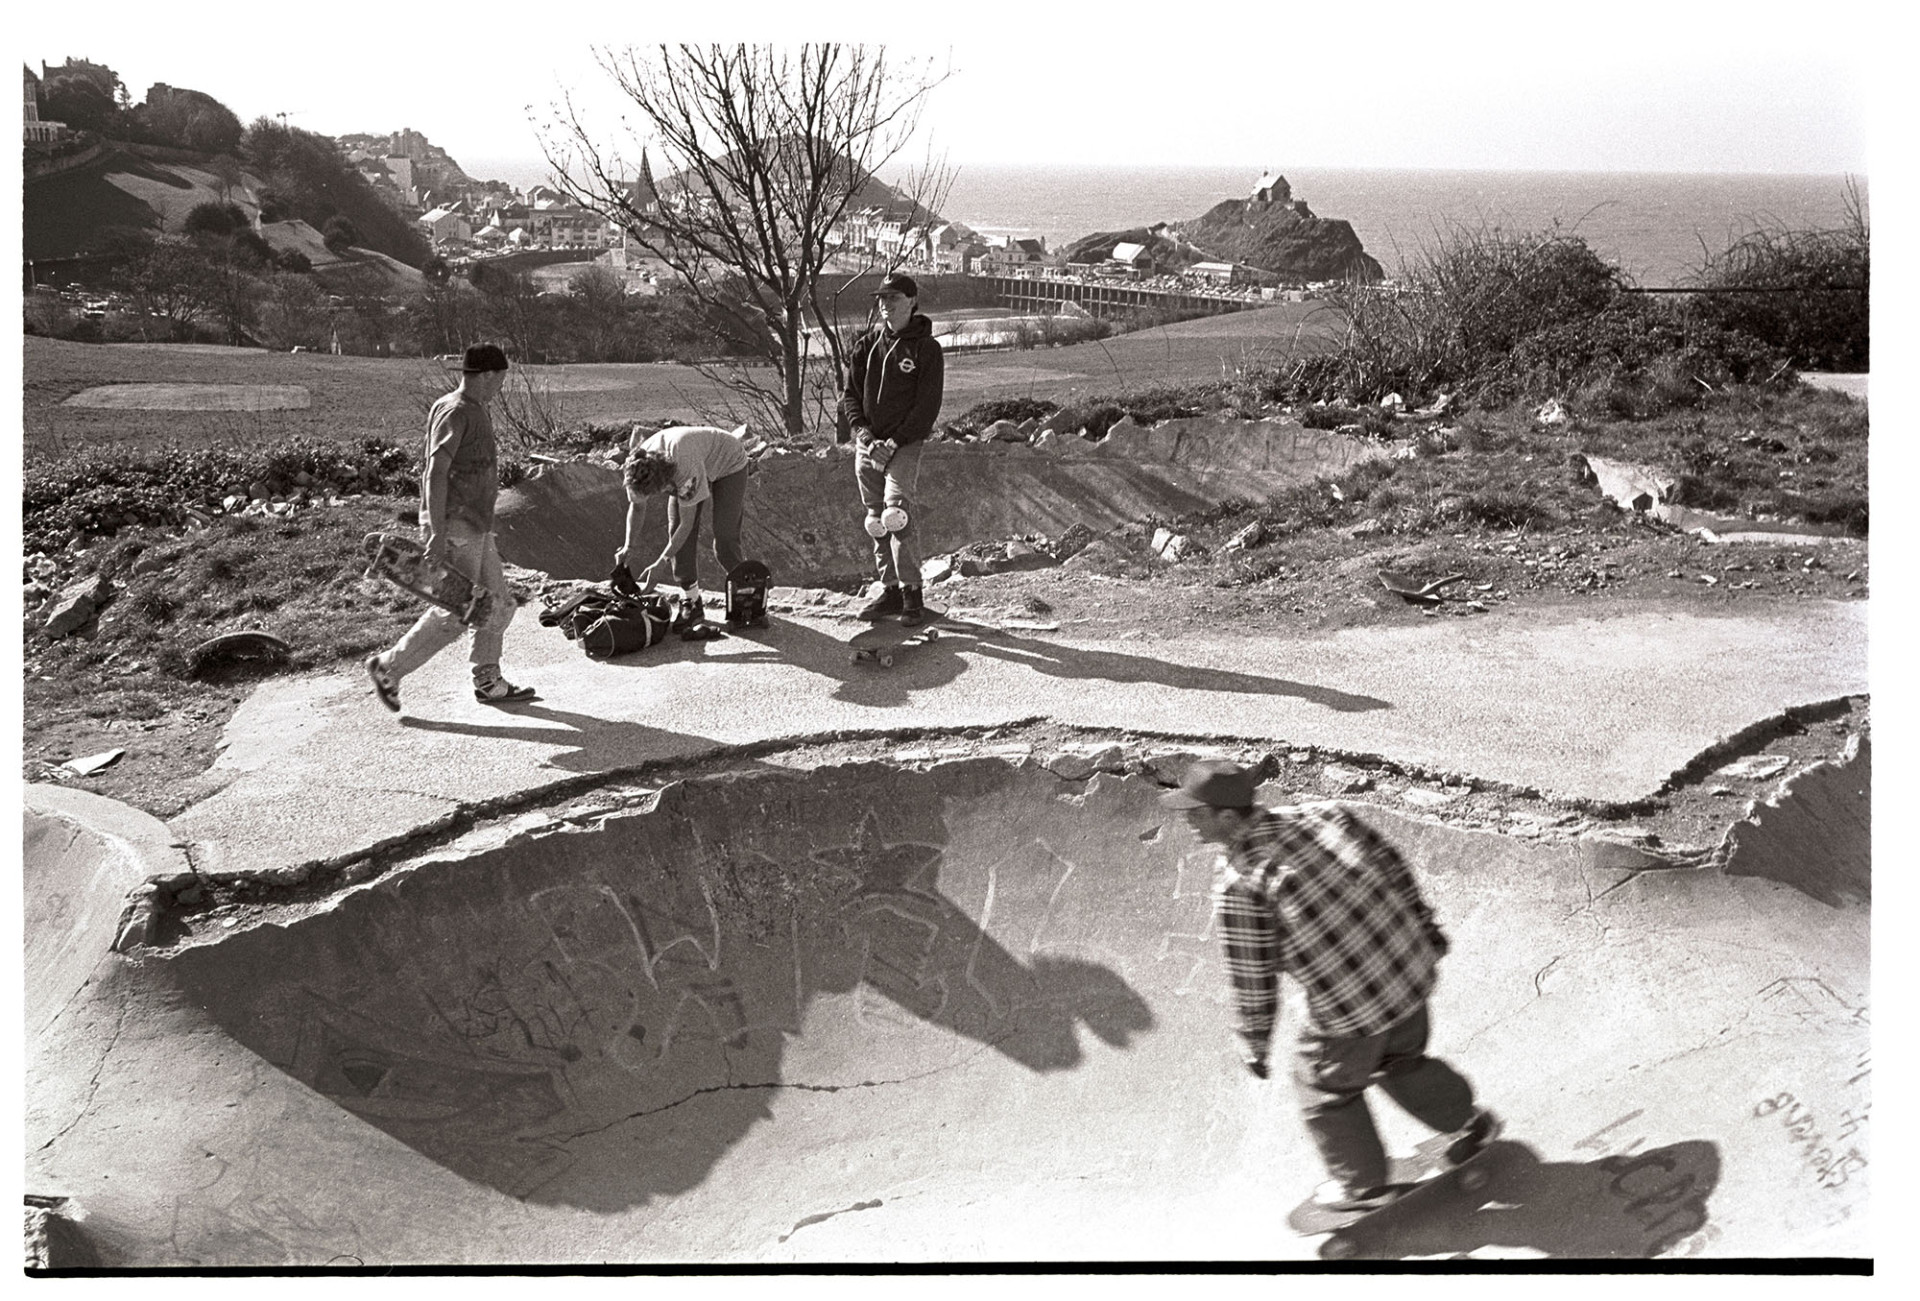 Skateboarders at skate park near sea. <br />
[Young men skateboarding at a skate park in Ilfracombe. The sea and town of Ilfracombe are visible in the background.]